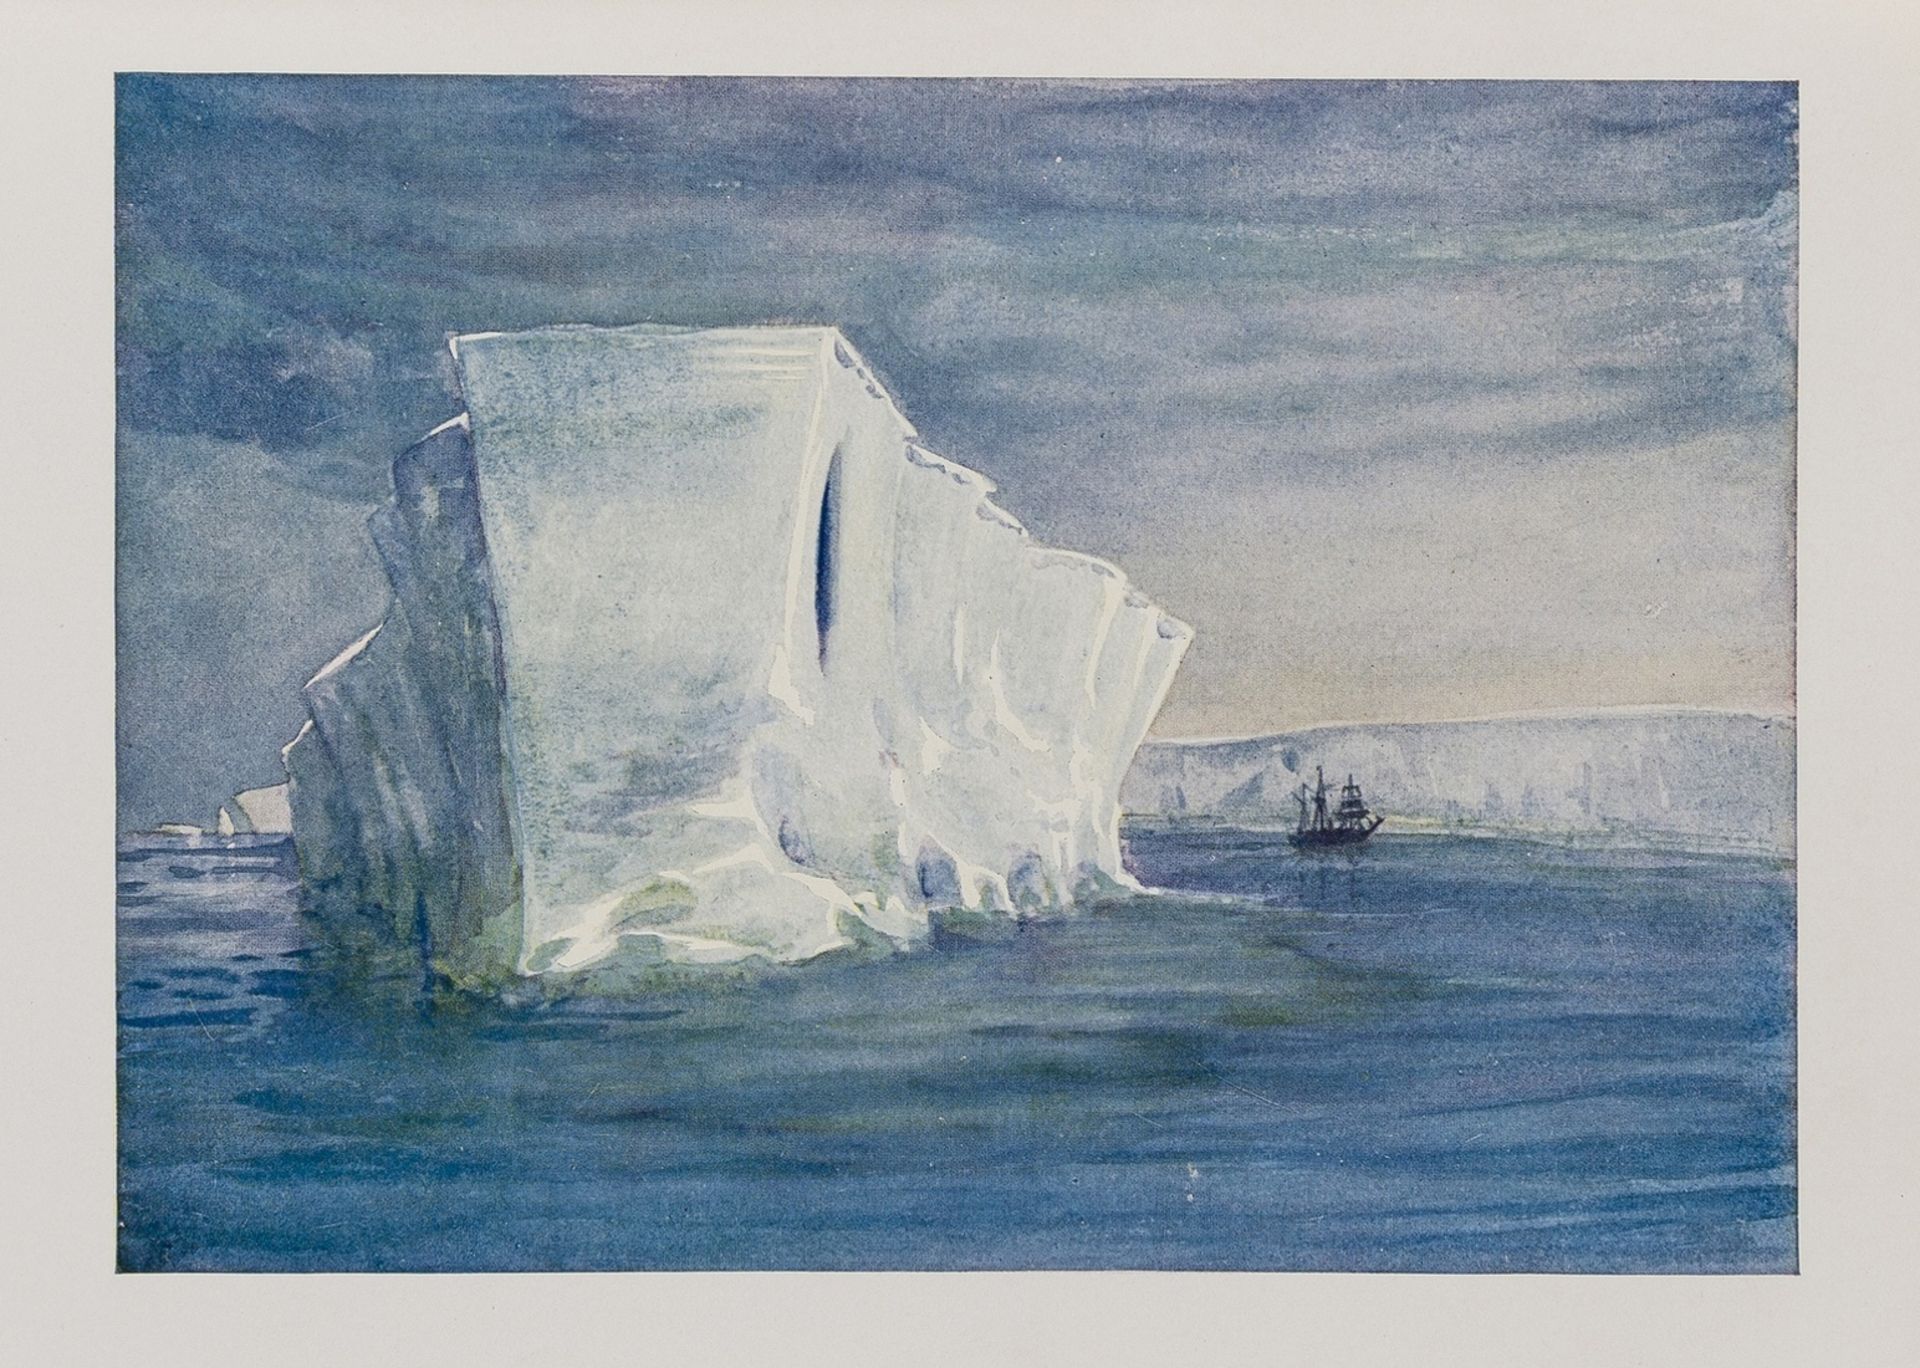 Polar.- Shackleton (Ernest H.) The Heart of the Antarctic, 2 vol., first edition, 1909.